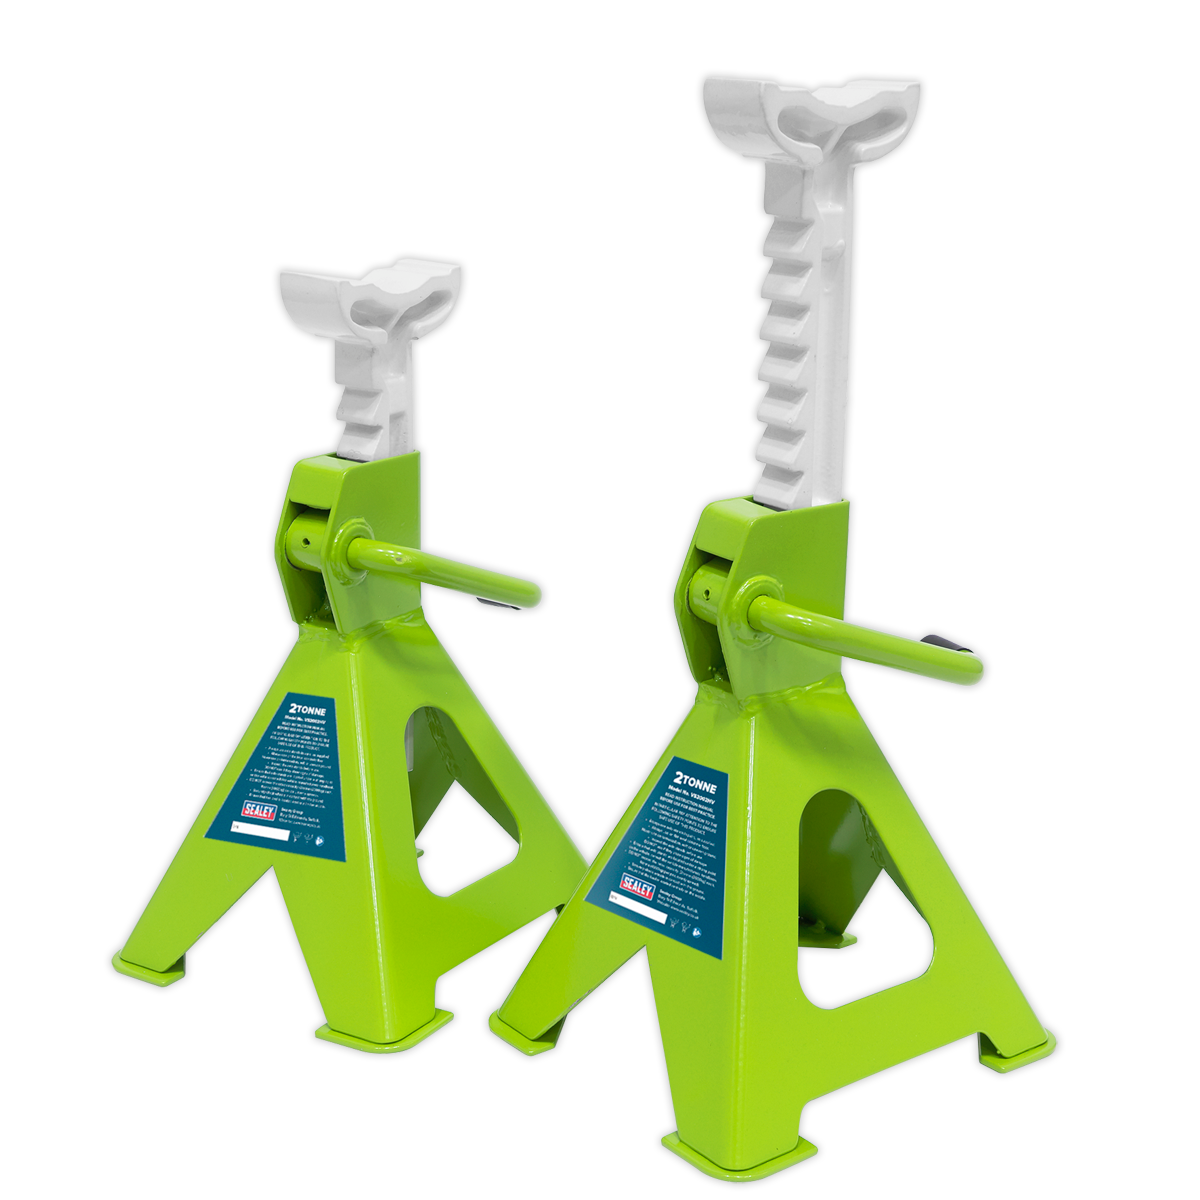 Sealey VS2002HV Axle Stands (Pair) 2tonne Capacity per Stand Ratchet Type - Hi-Vis Green